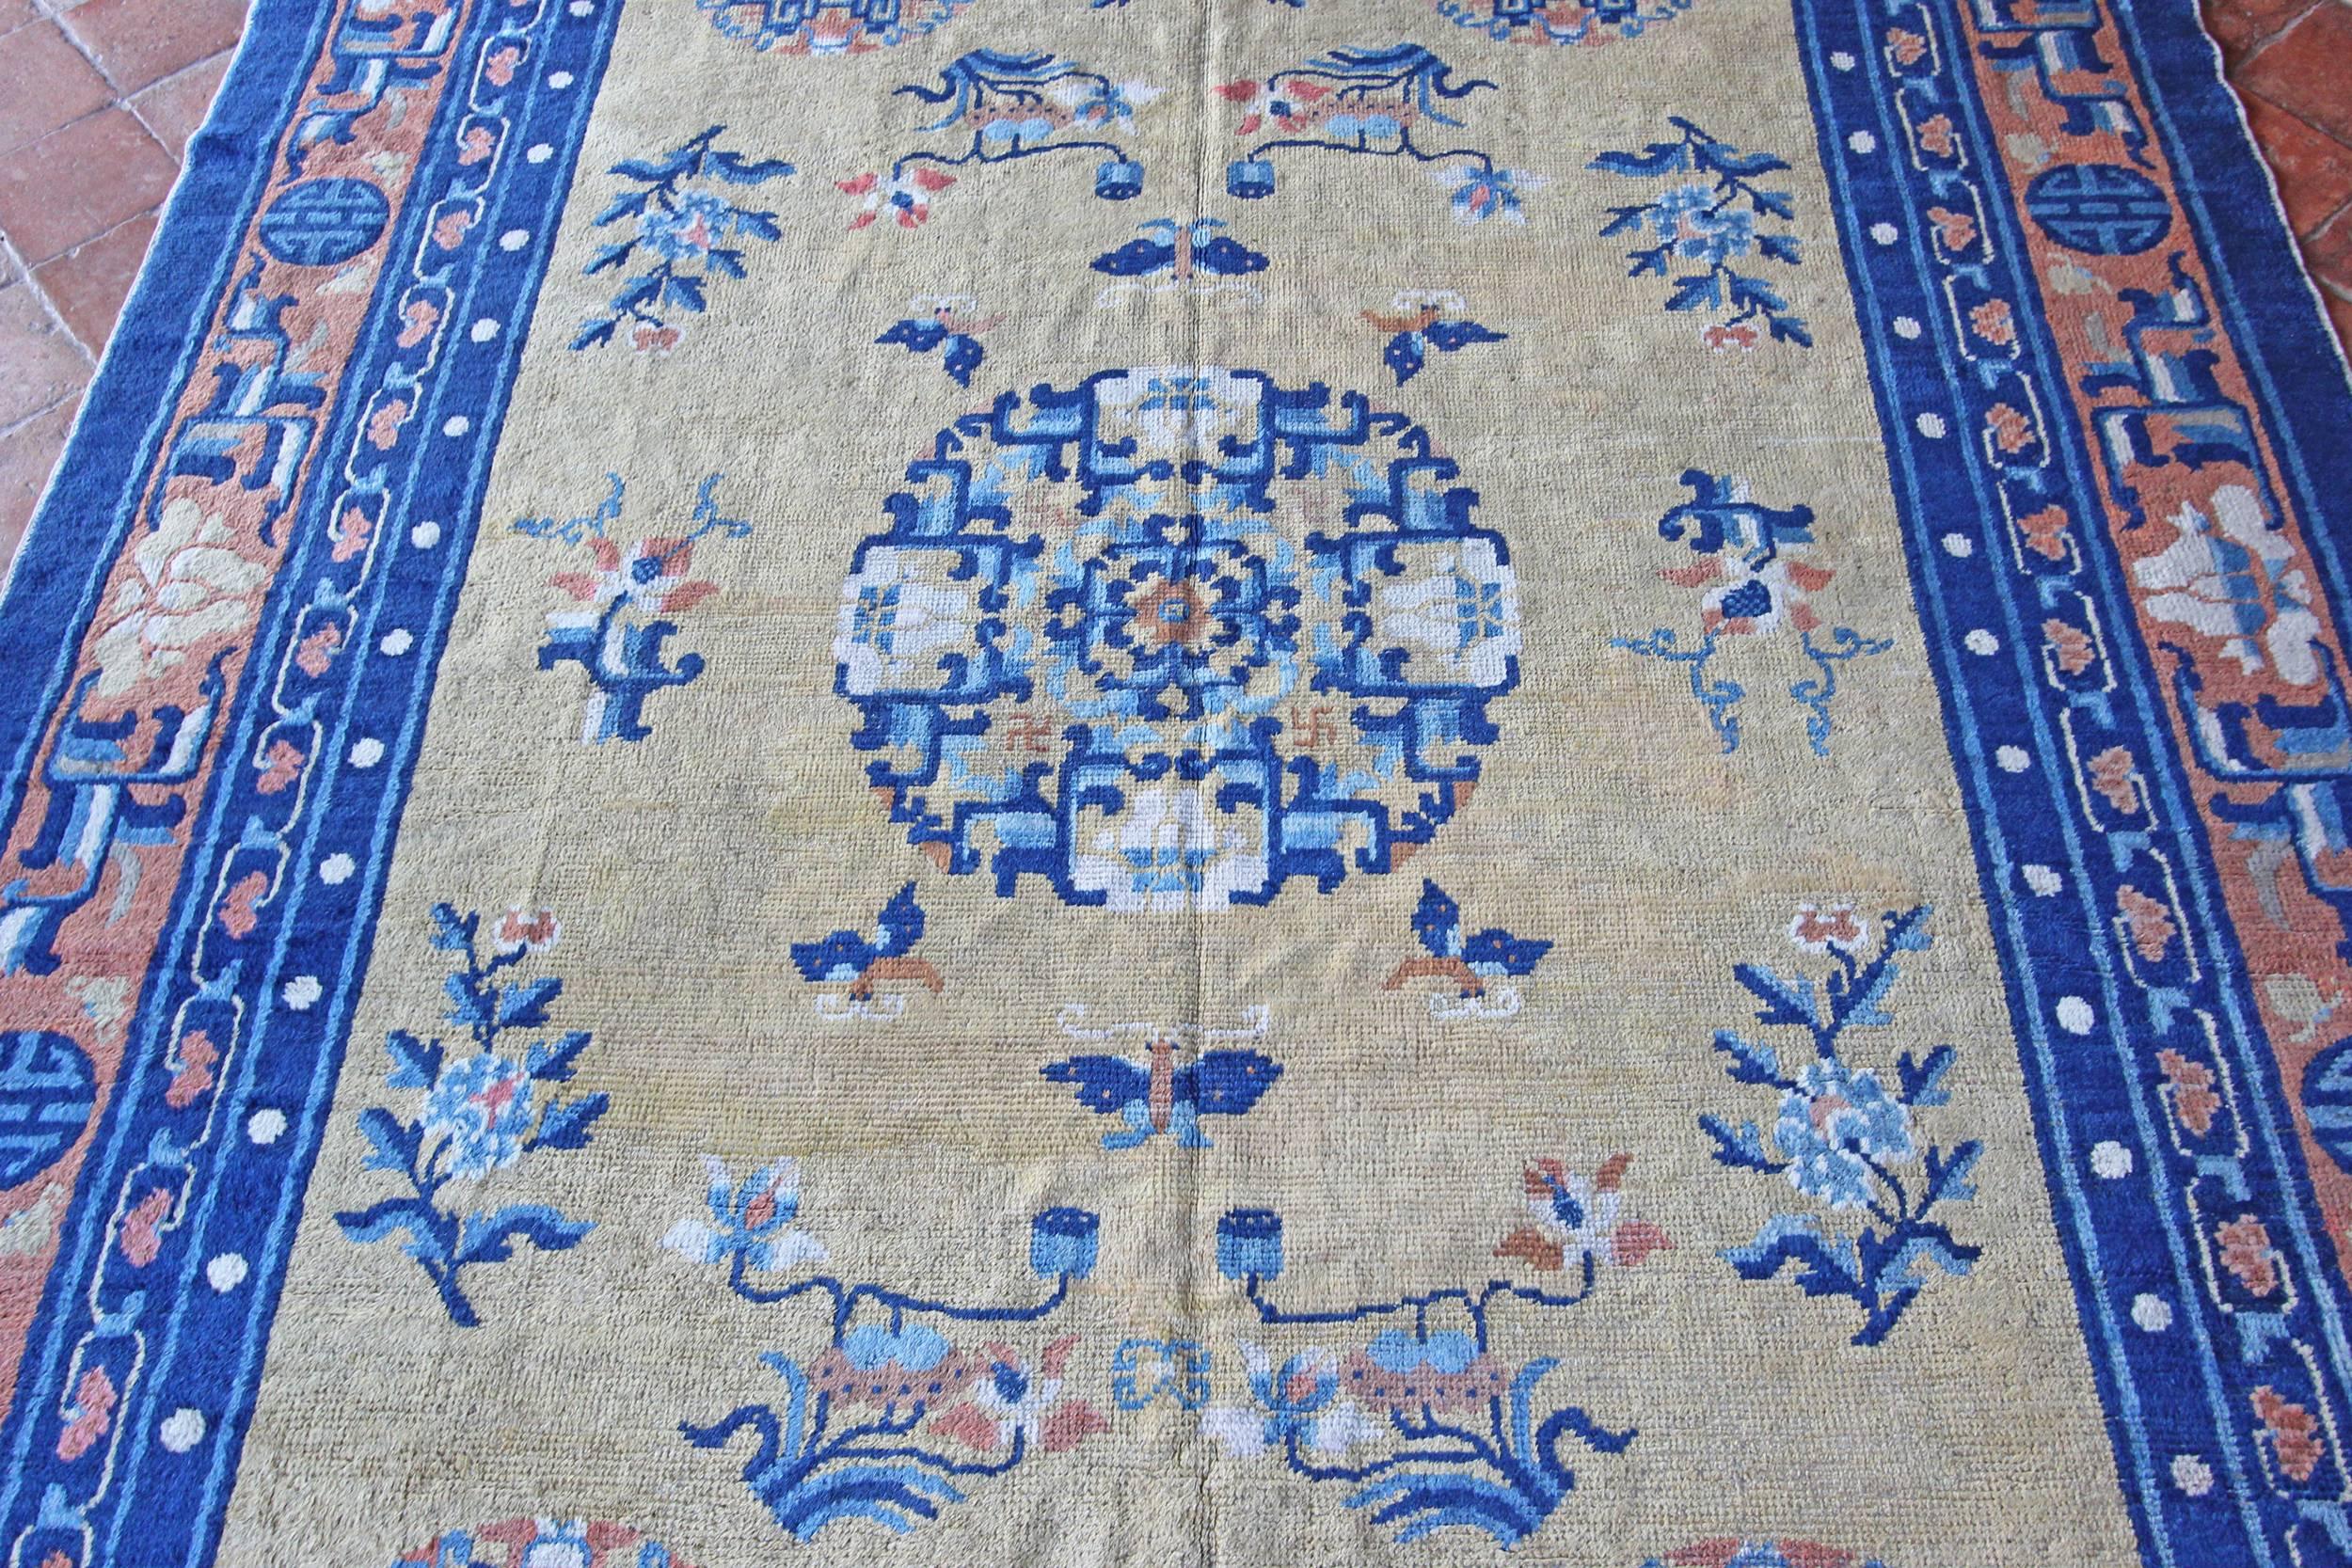 Hand-Woven Antique Chinese Ningxia Carpet